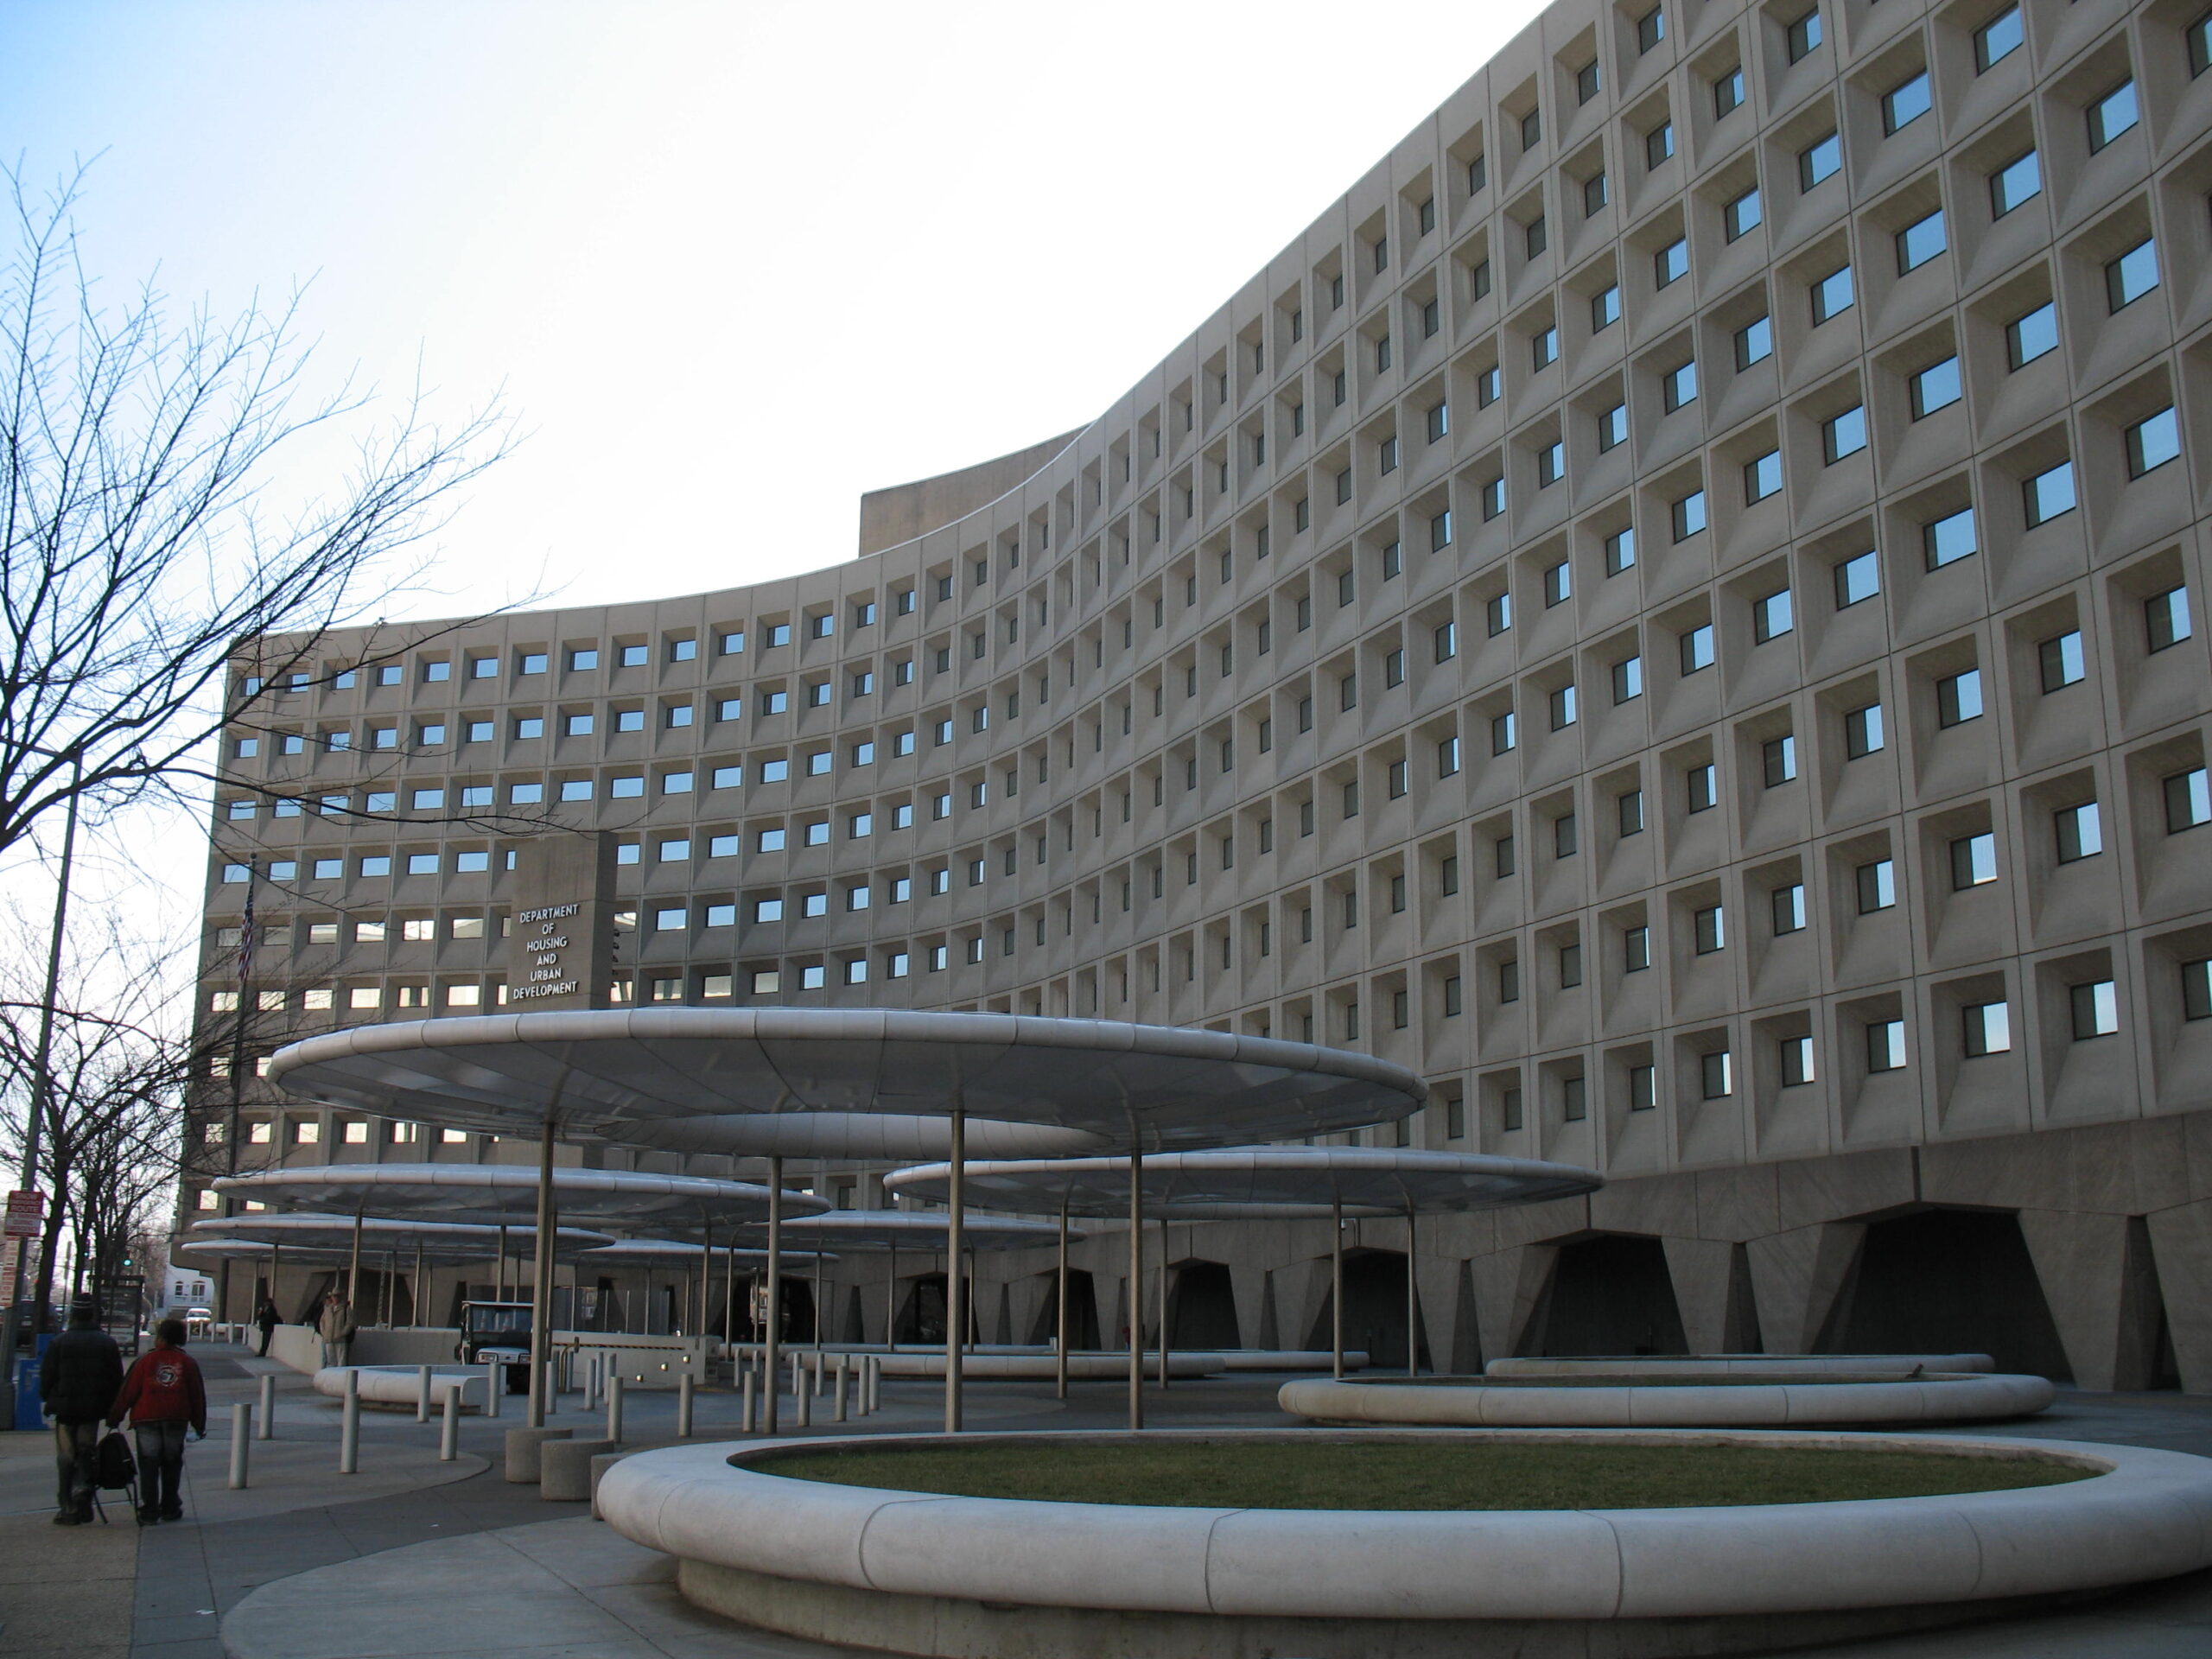 Photo of curved concrete government building with square windows.